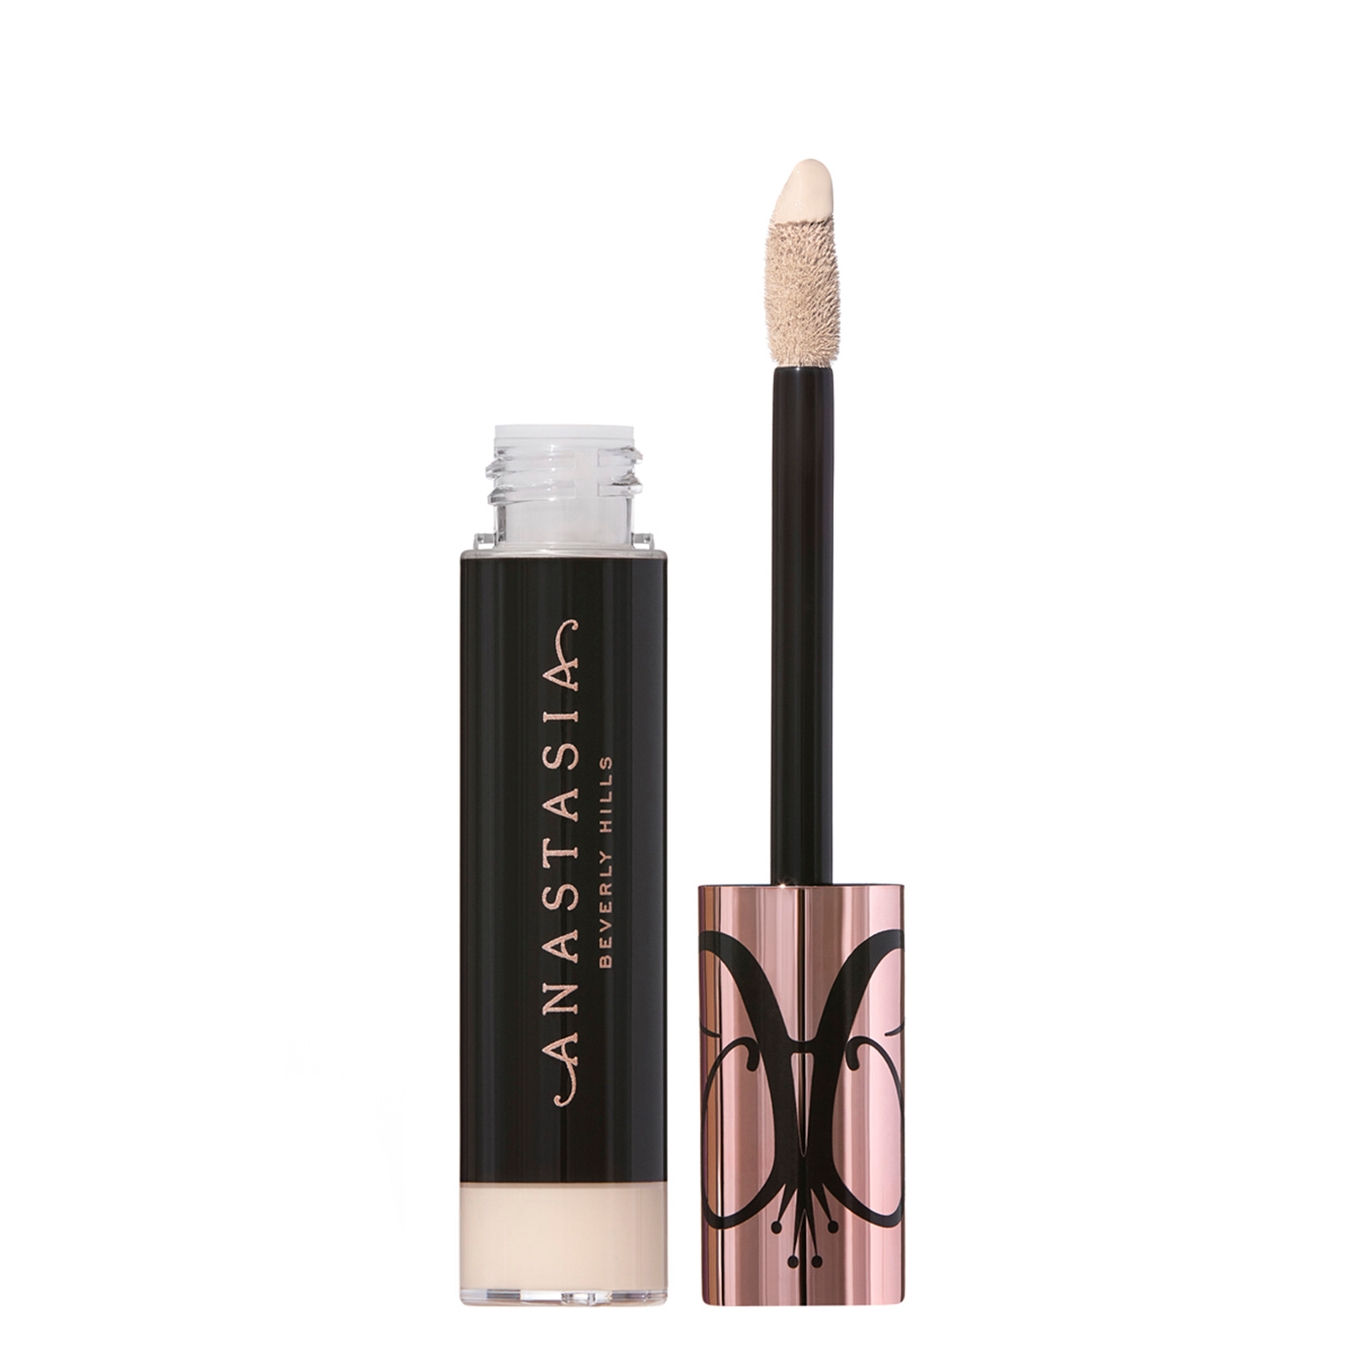 Anastasia Beverly Hills Magic Touch Concealer In White